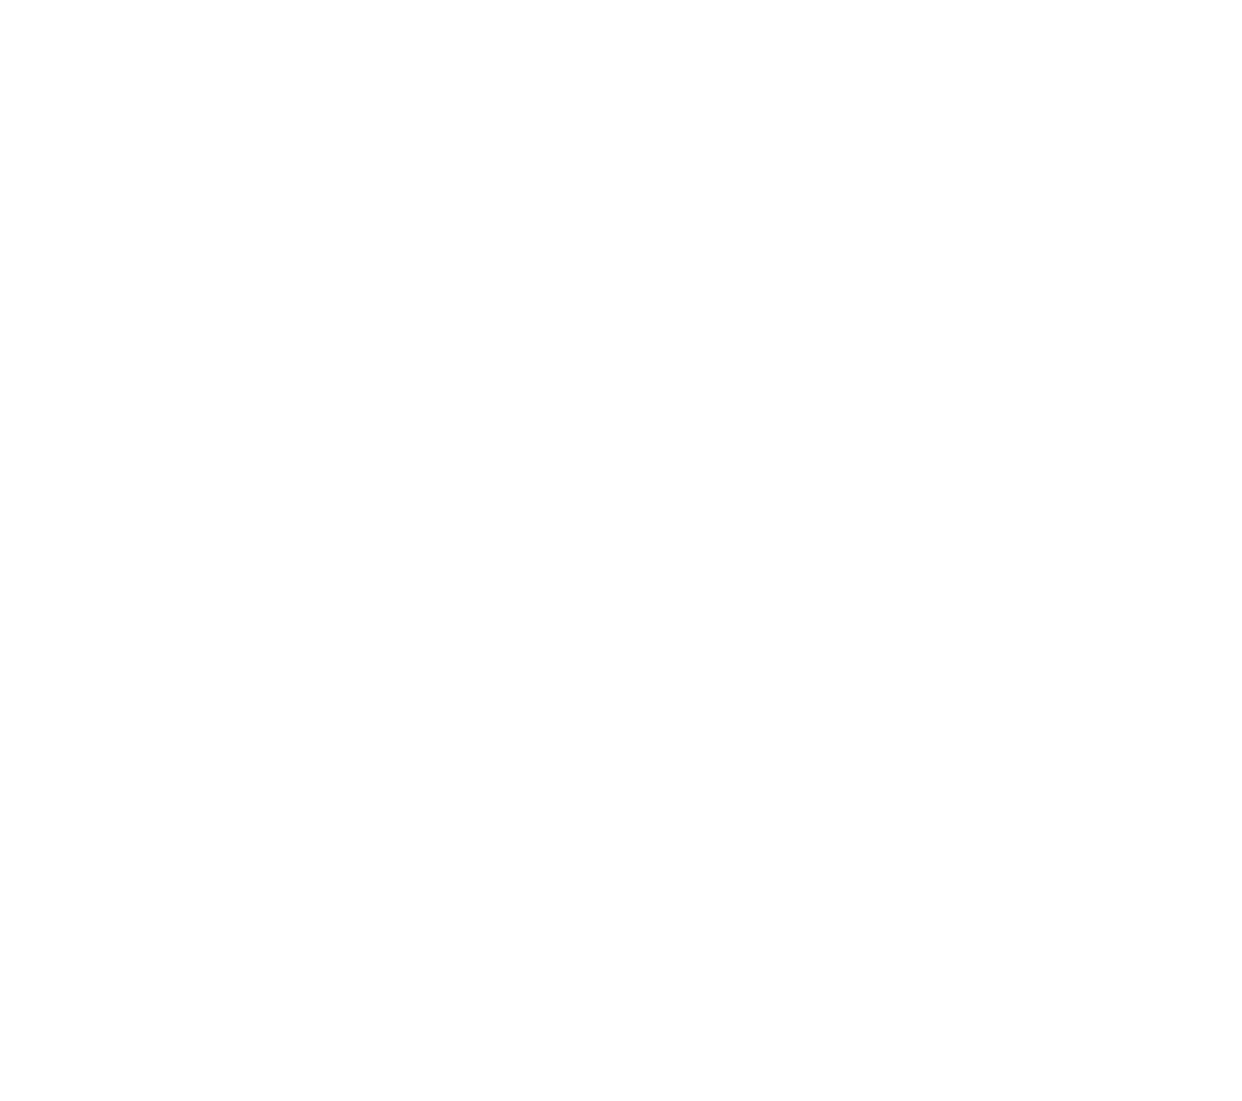 Innovation is encouraged. During Green Week students discovered how the Black Soldier Fly larvae’s ferocious appetite...